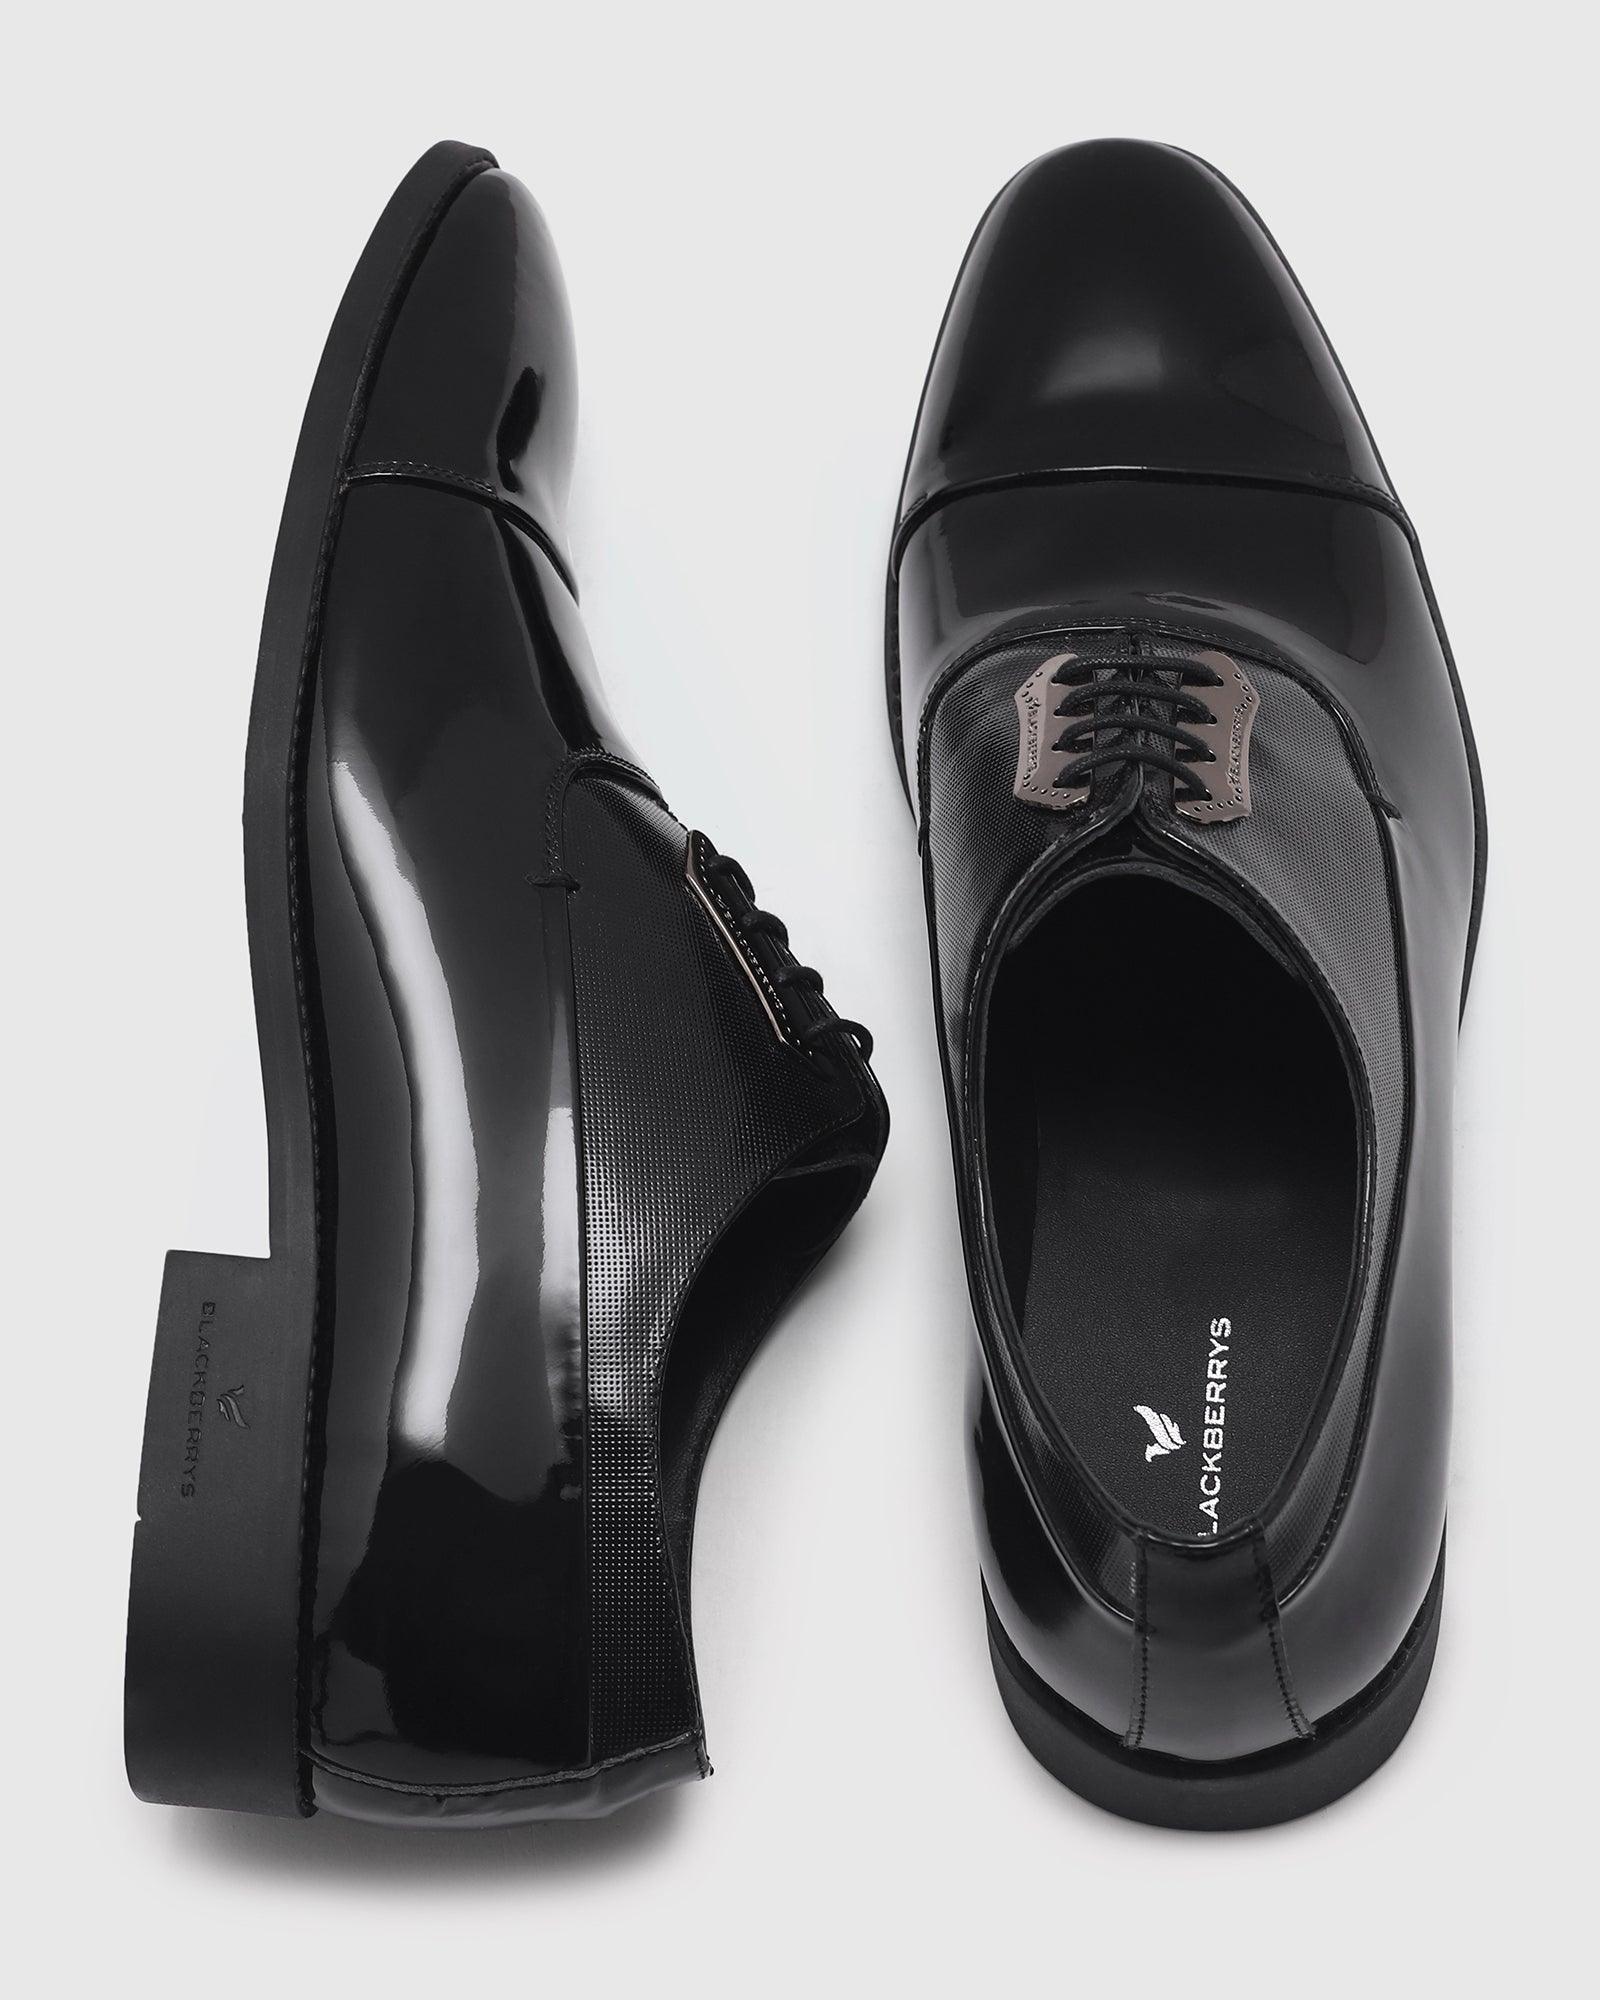 Leather Formal Black Solid Oxford Shoes - Purse